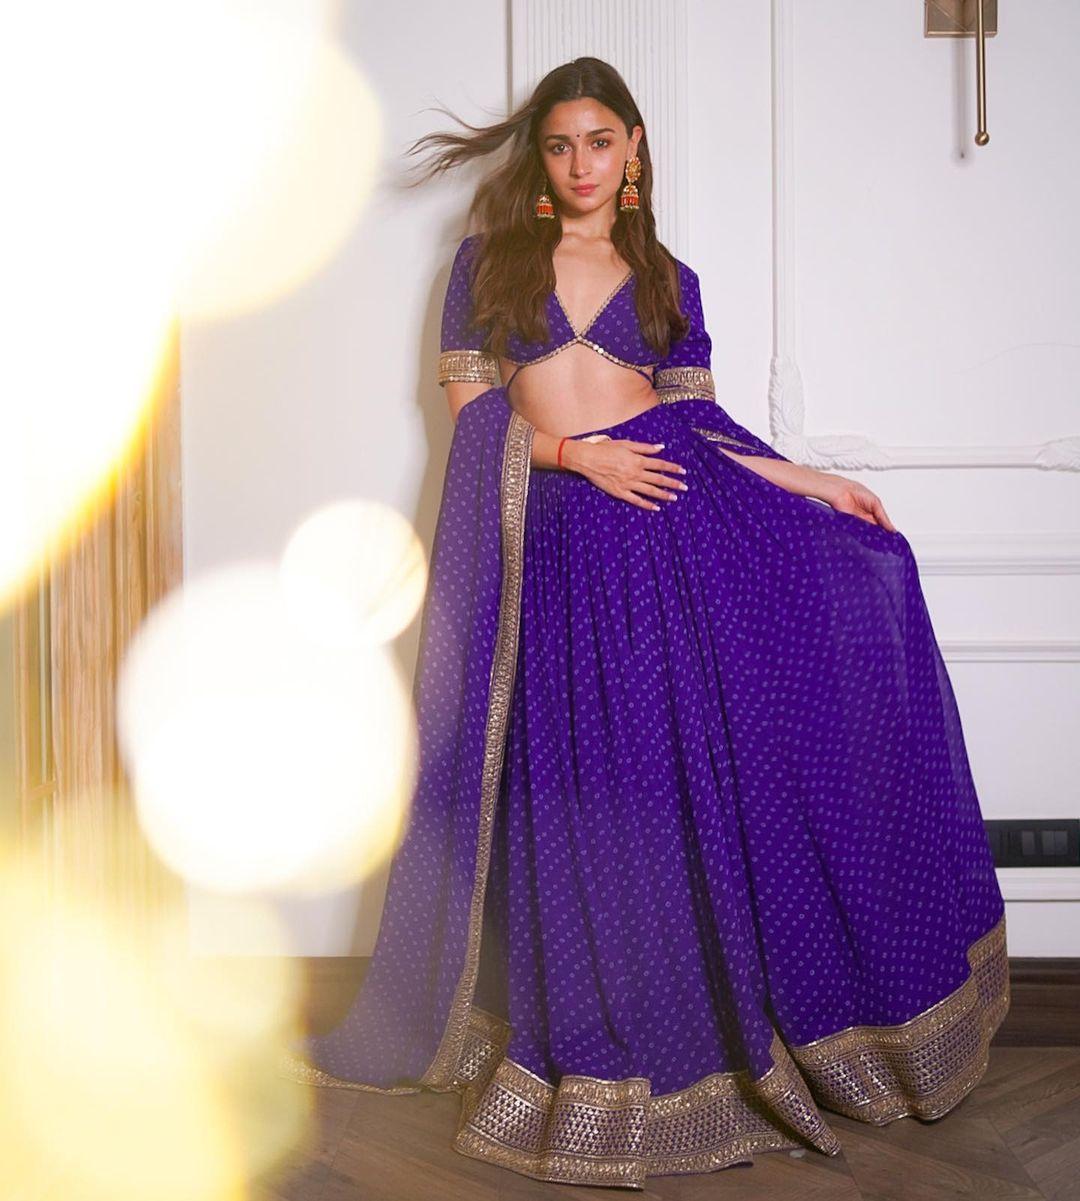 8 Times Alia Bhatt Dished Out Unforgettable Red Carpet Looks - HELLO! India